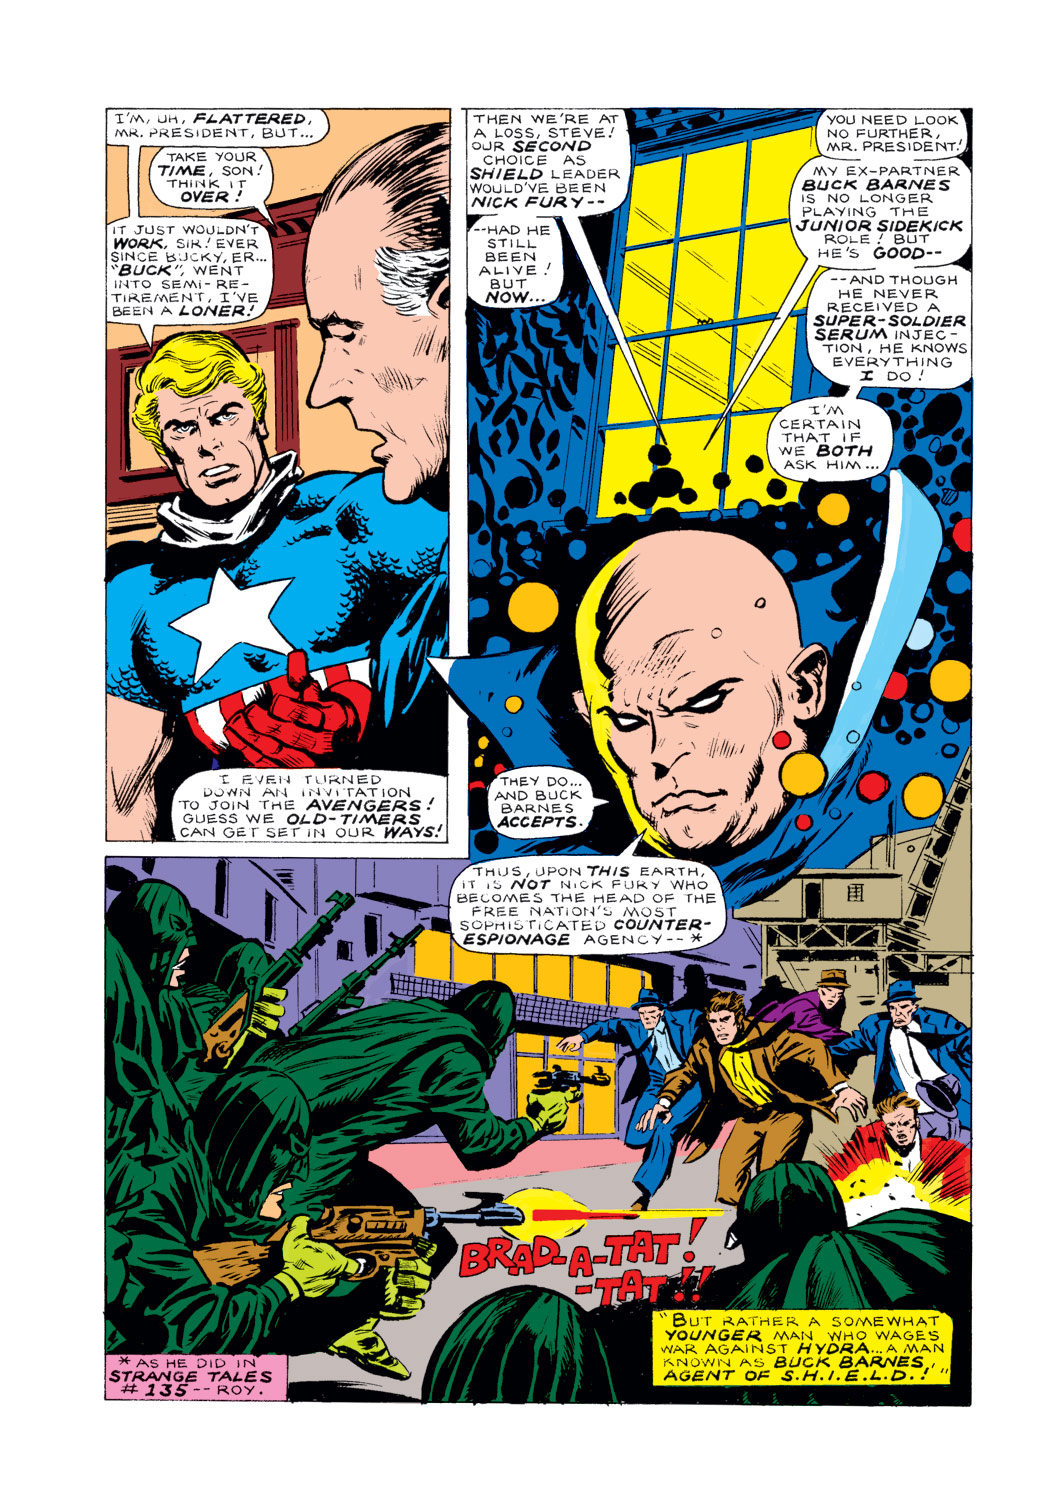 What If? (1977) issue 5 - Captain America hadn't vanished during World War Two - Page 14